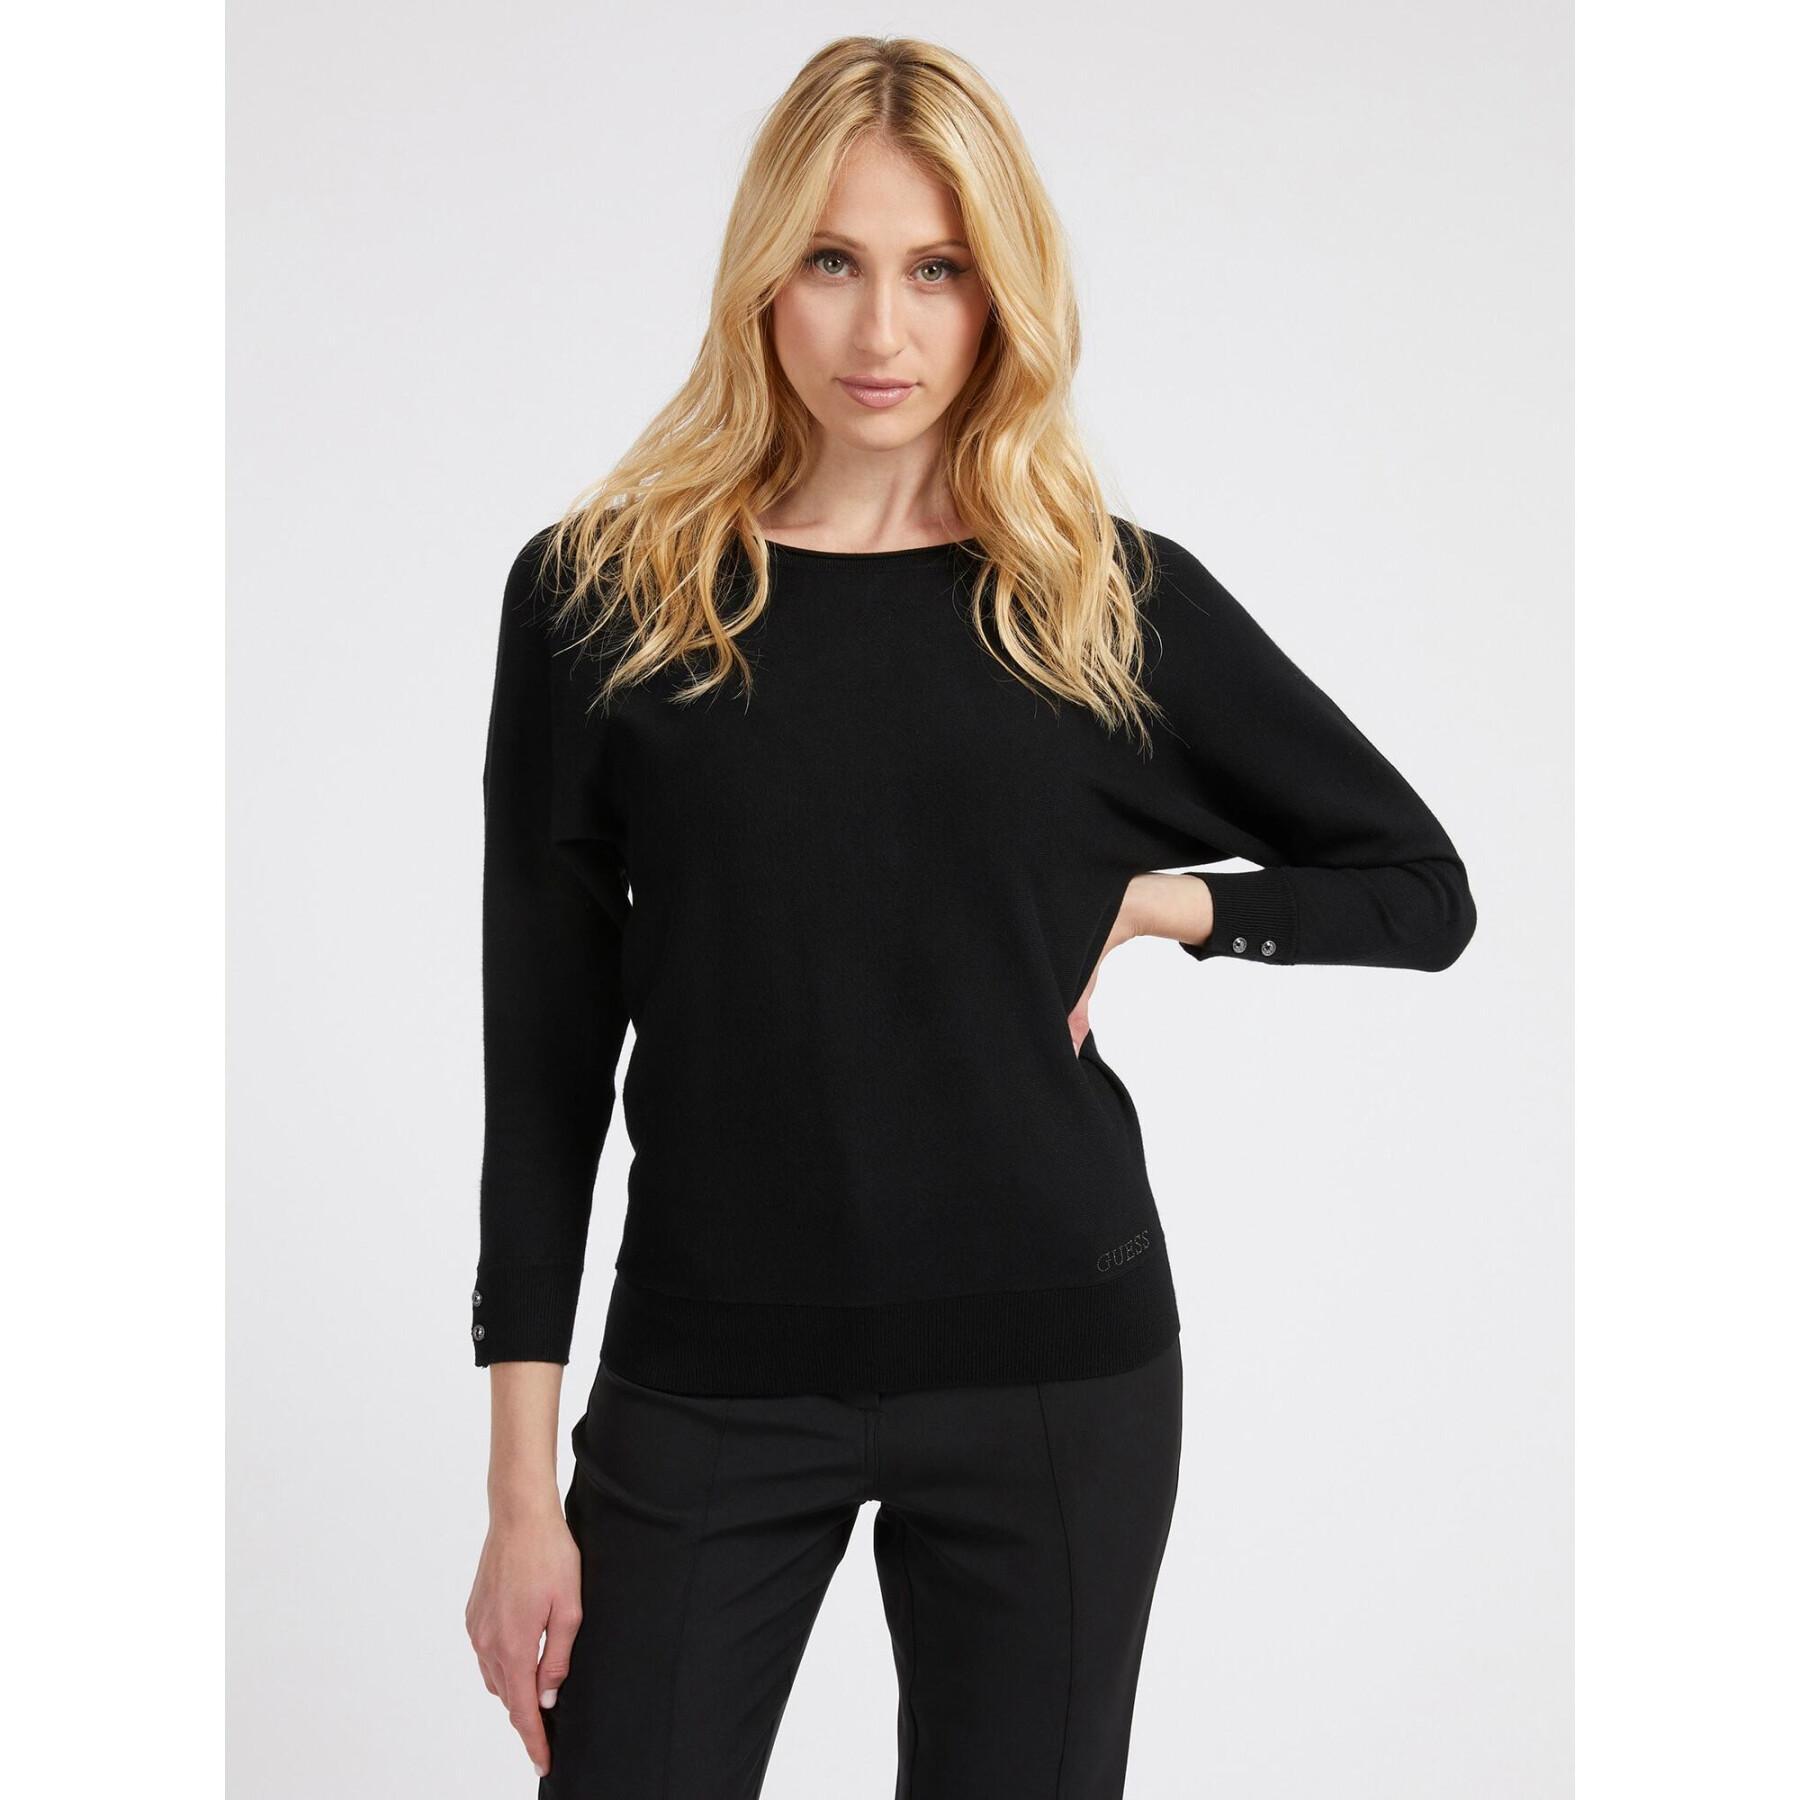 Pullover Frau Guess Adele